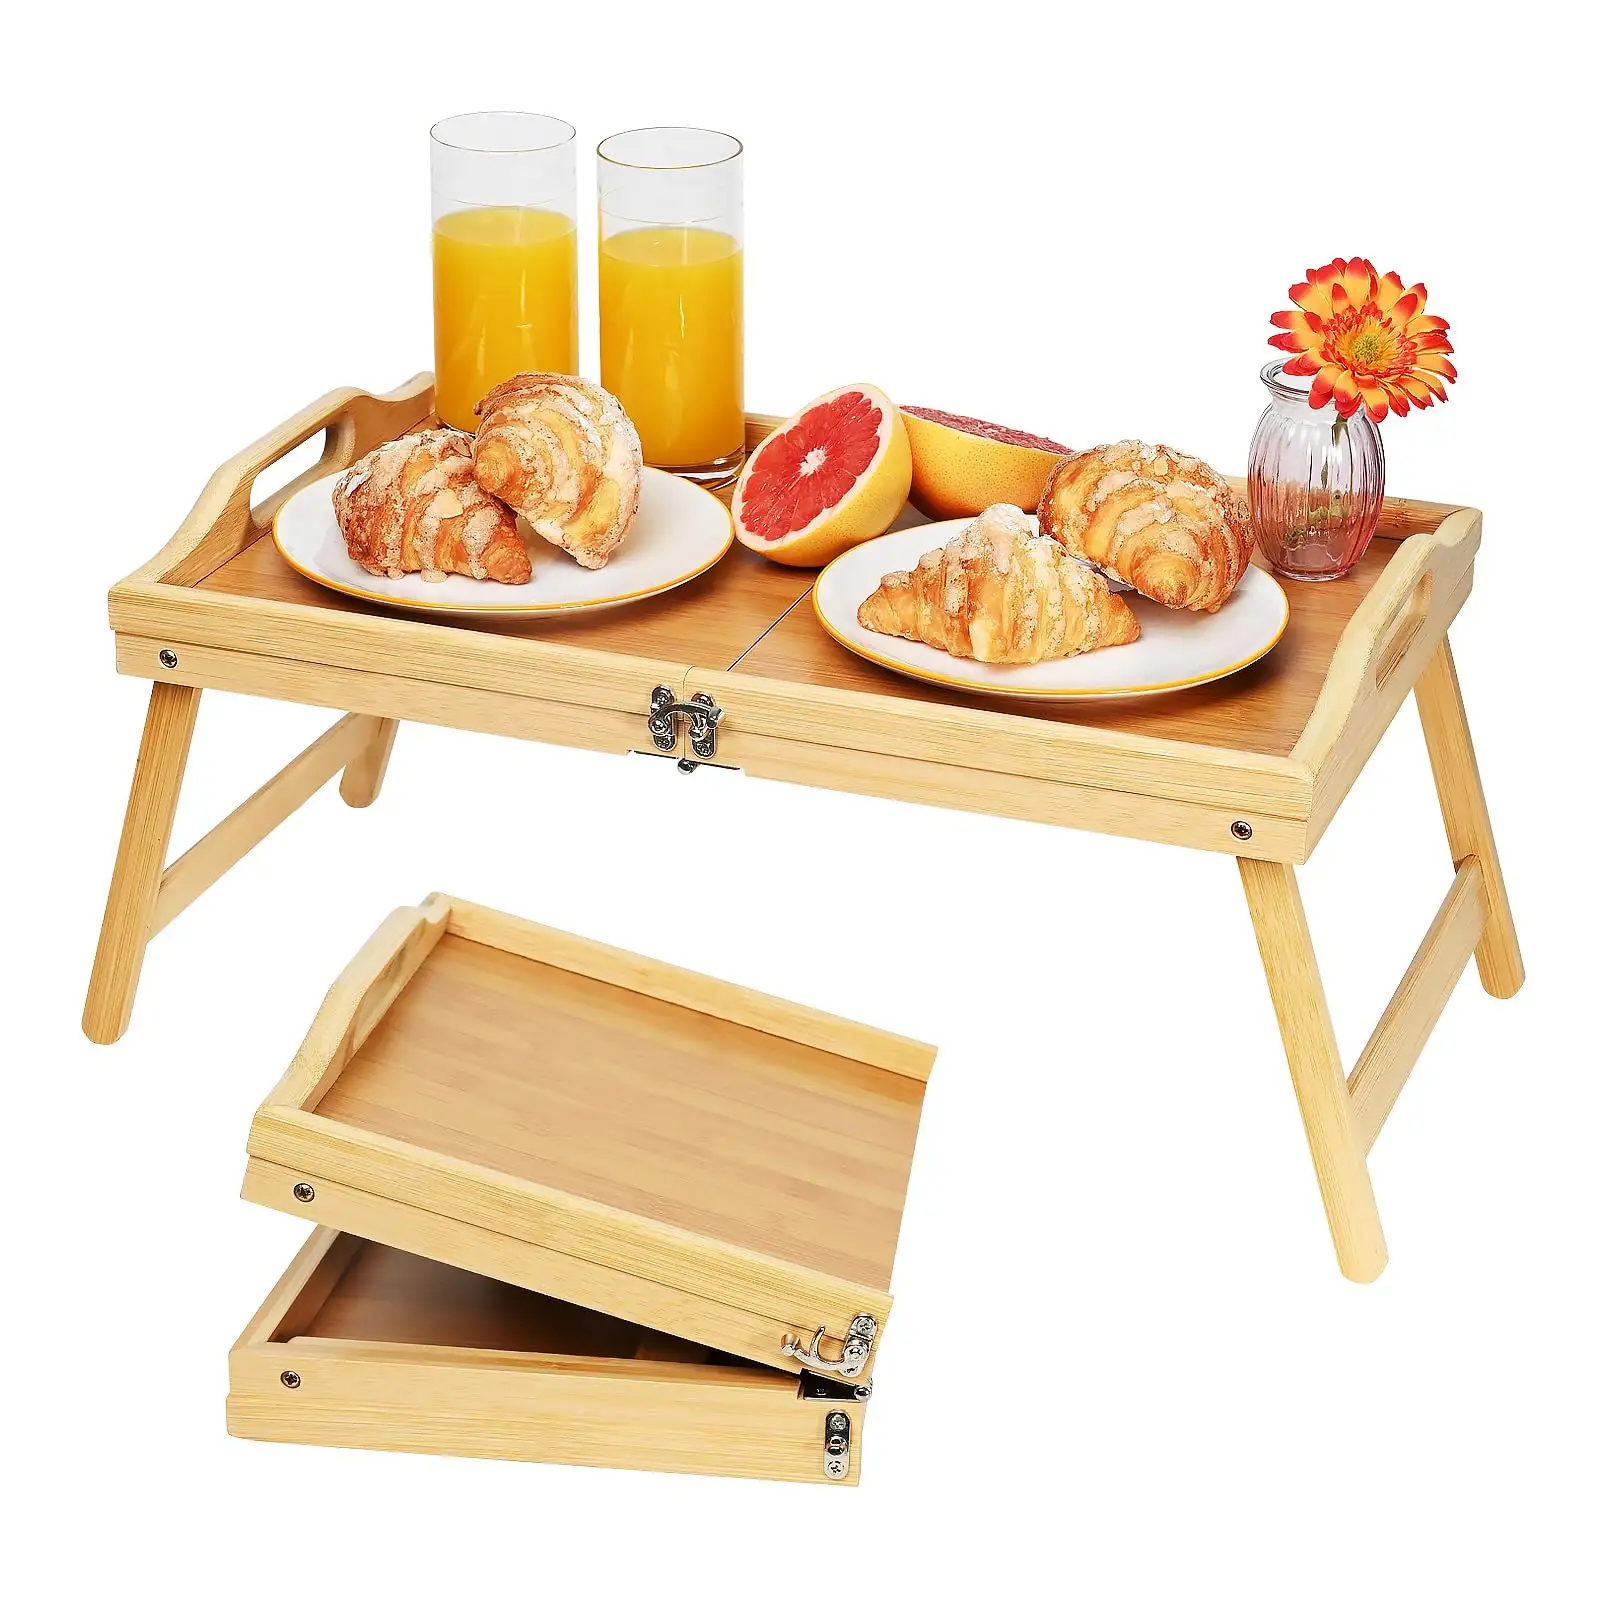 Wholesale Bamboo Wooden Foldable Bed Tray Bamboo Table Laptop Tray Breakfast in Bed Trays with Folding Legs